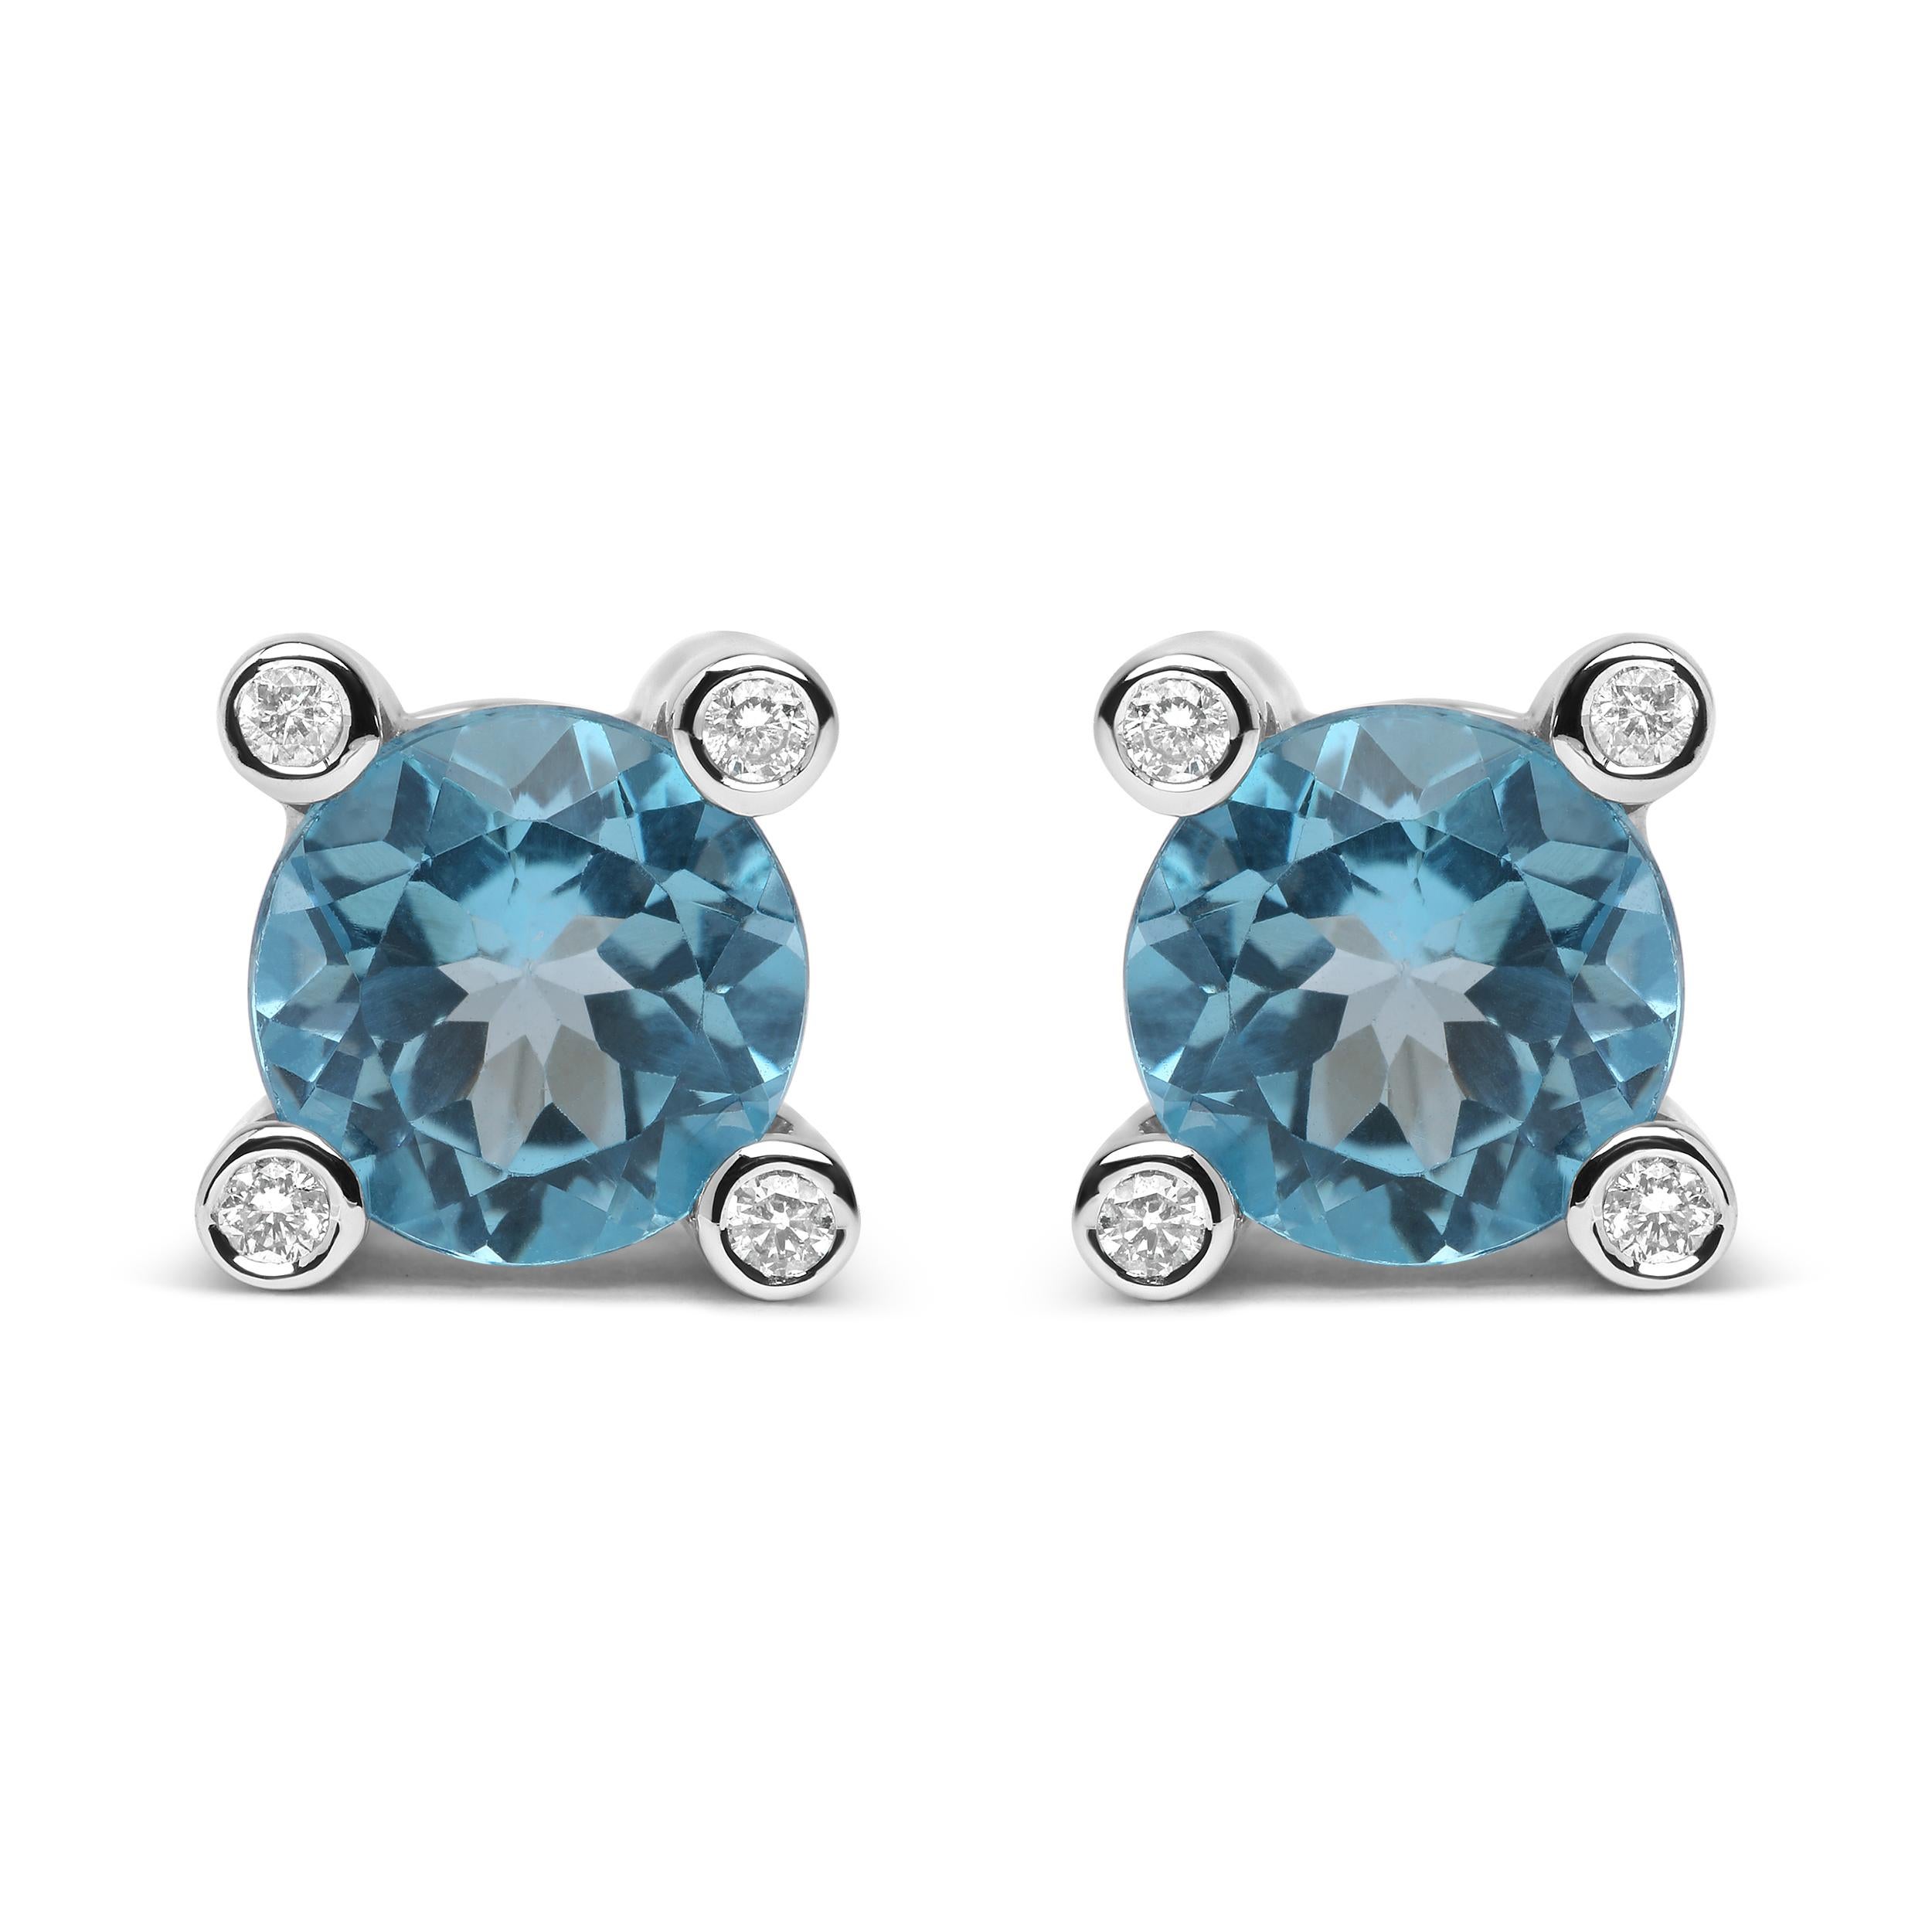 Let your colors shine through with this sweet and sparkly pair of 18k white gold stud earrings. As the centerpiece of this pair, each earring is in possession of a 10x10mm round heat-treated sky blue topaz gemstone in a prong setting. The prong